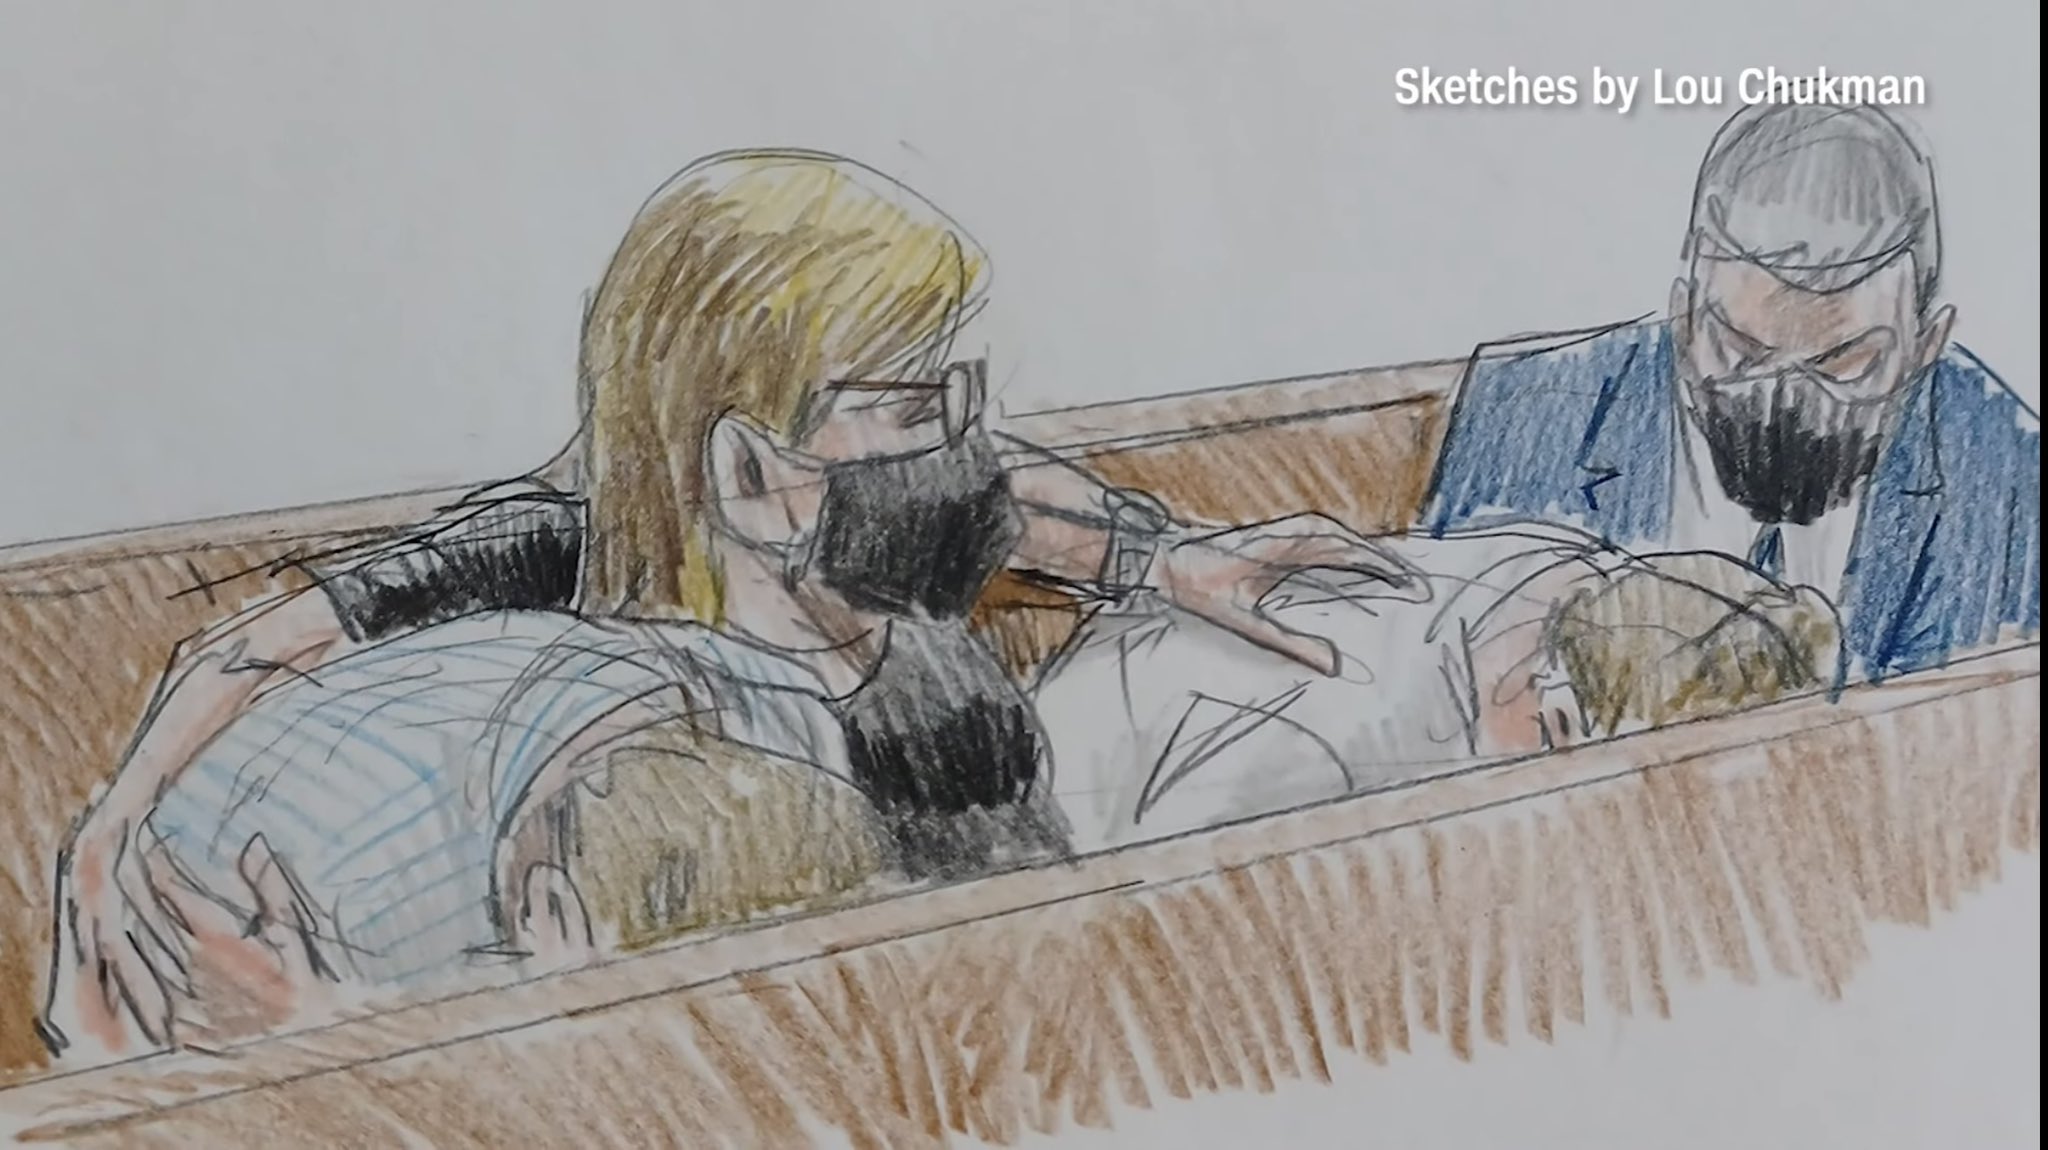 the twins’ mom on Twitter: "Unfortunately the courtroom sketch artist